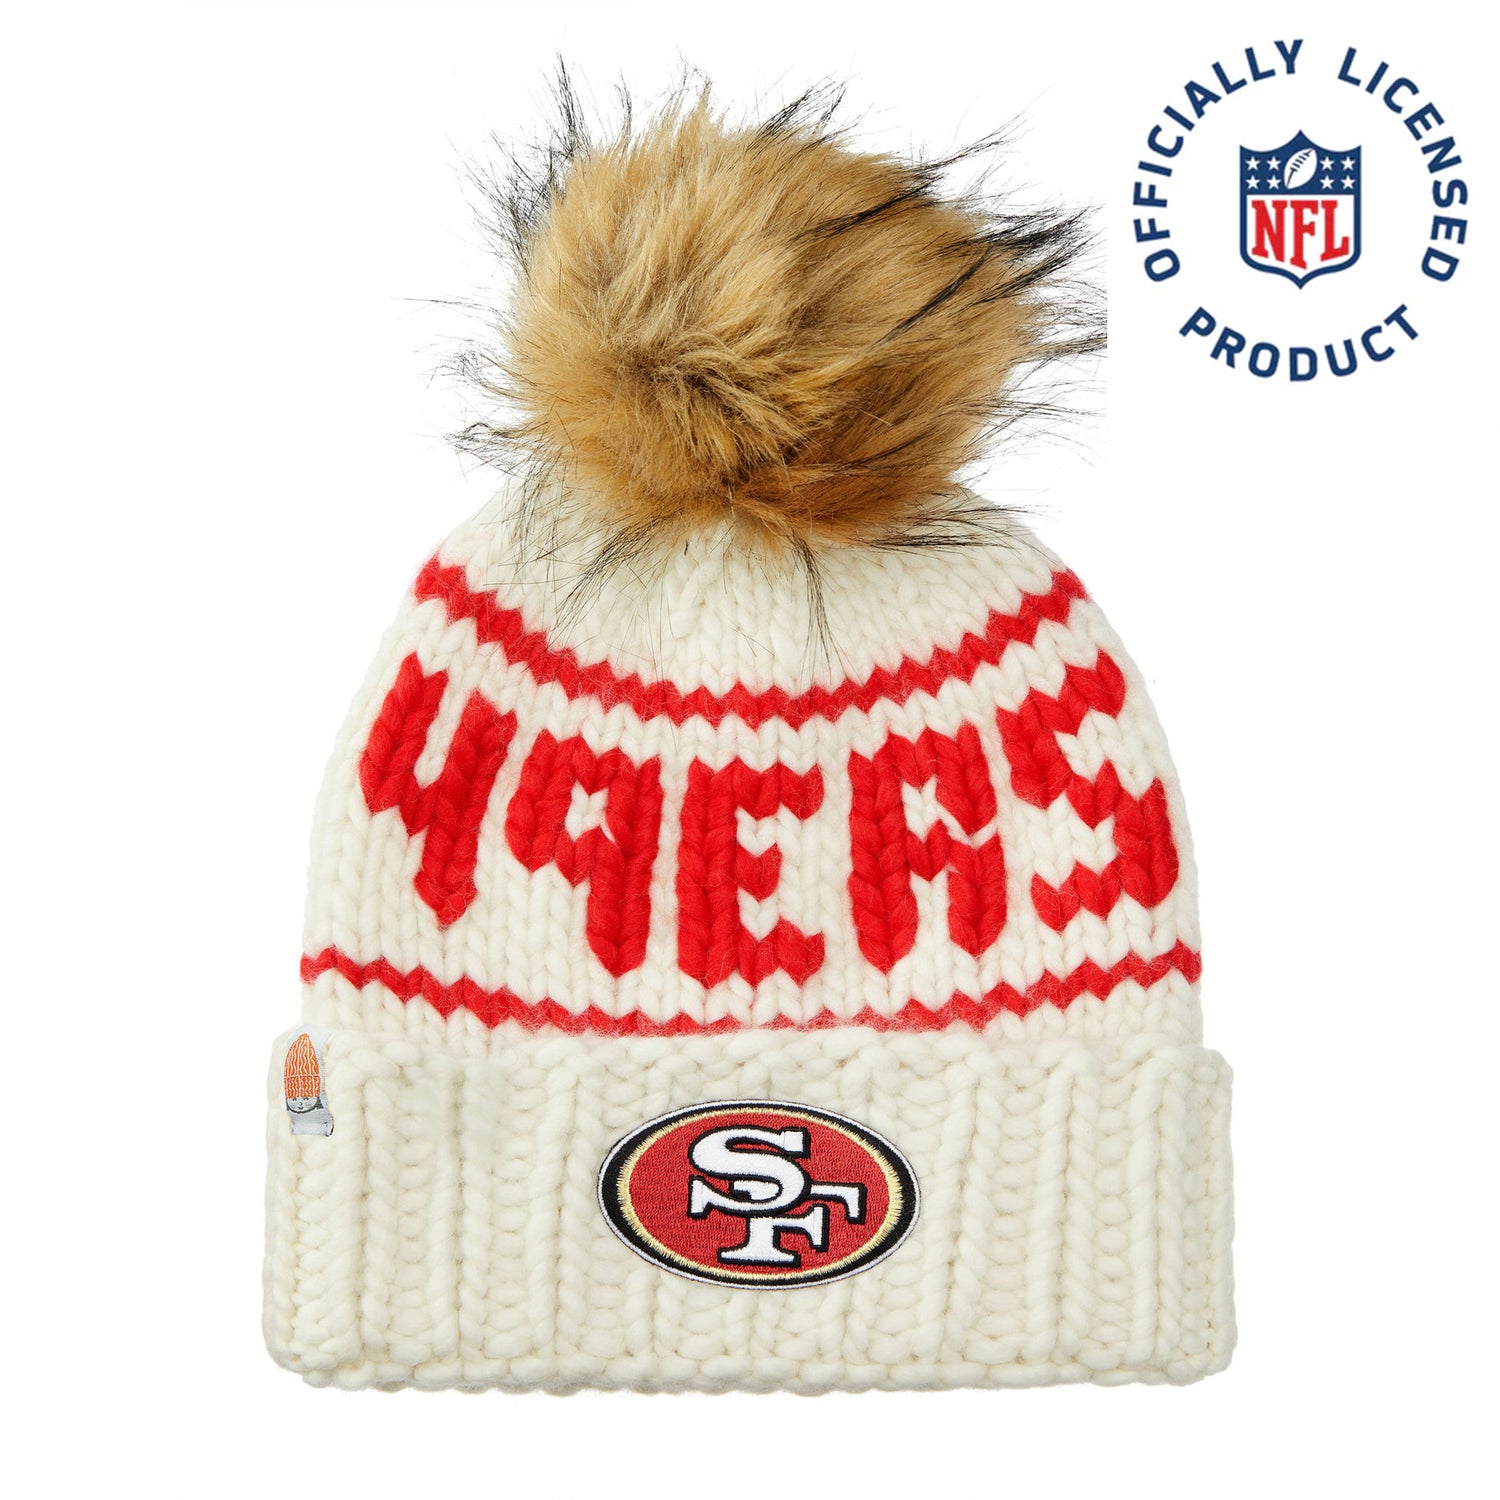 The 49ers Beanie with Faux Fur Pom, Winter Hat